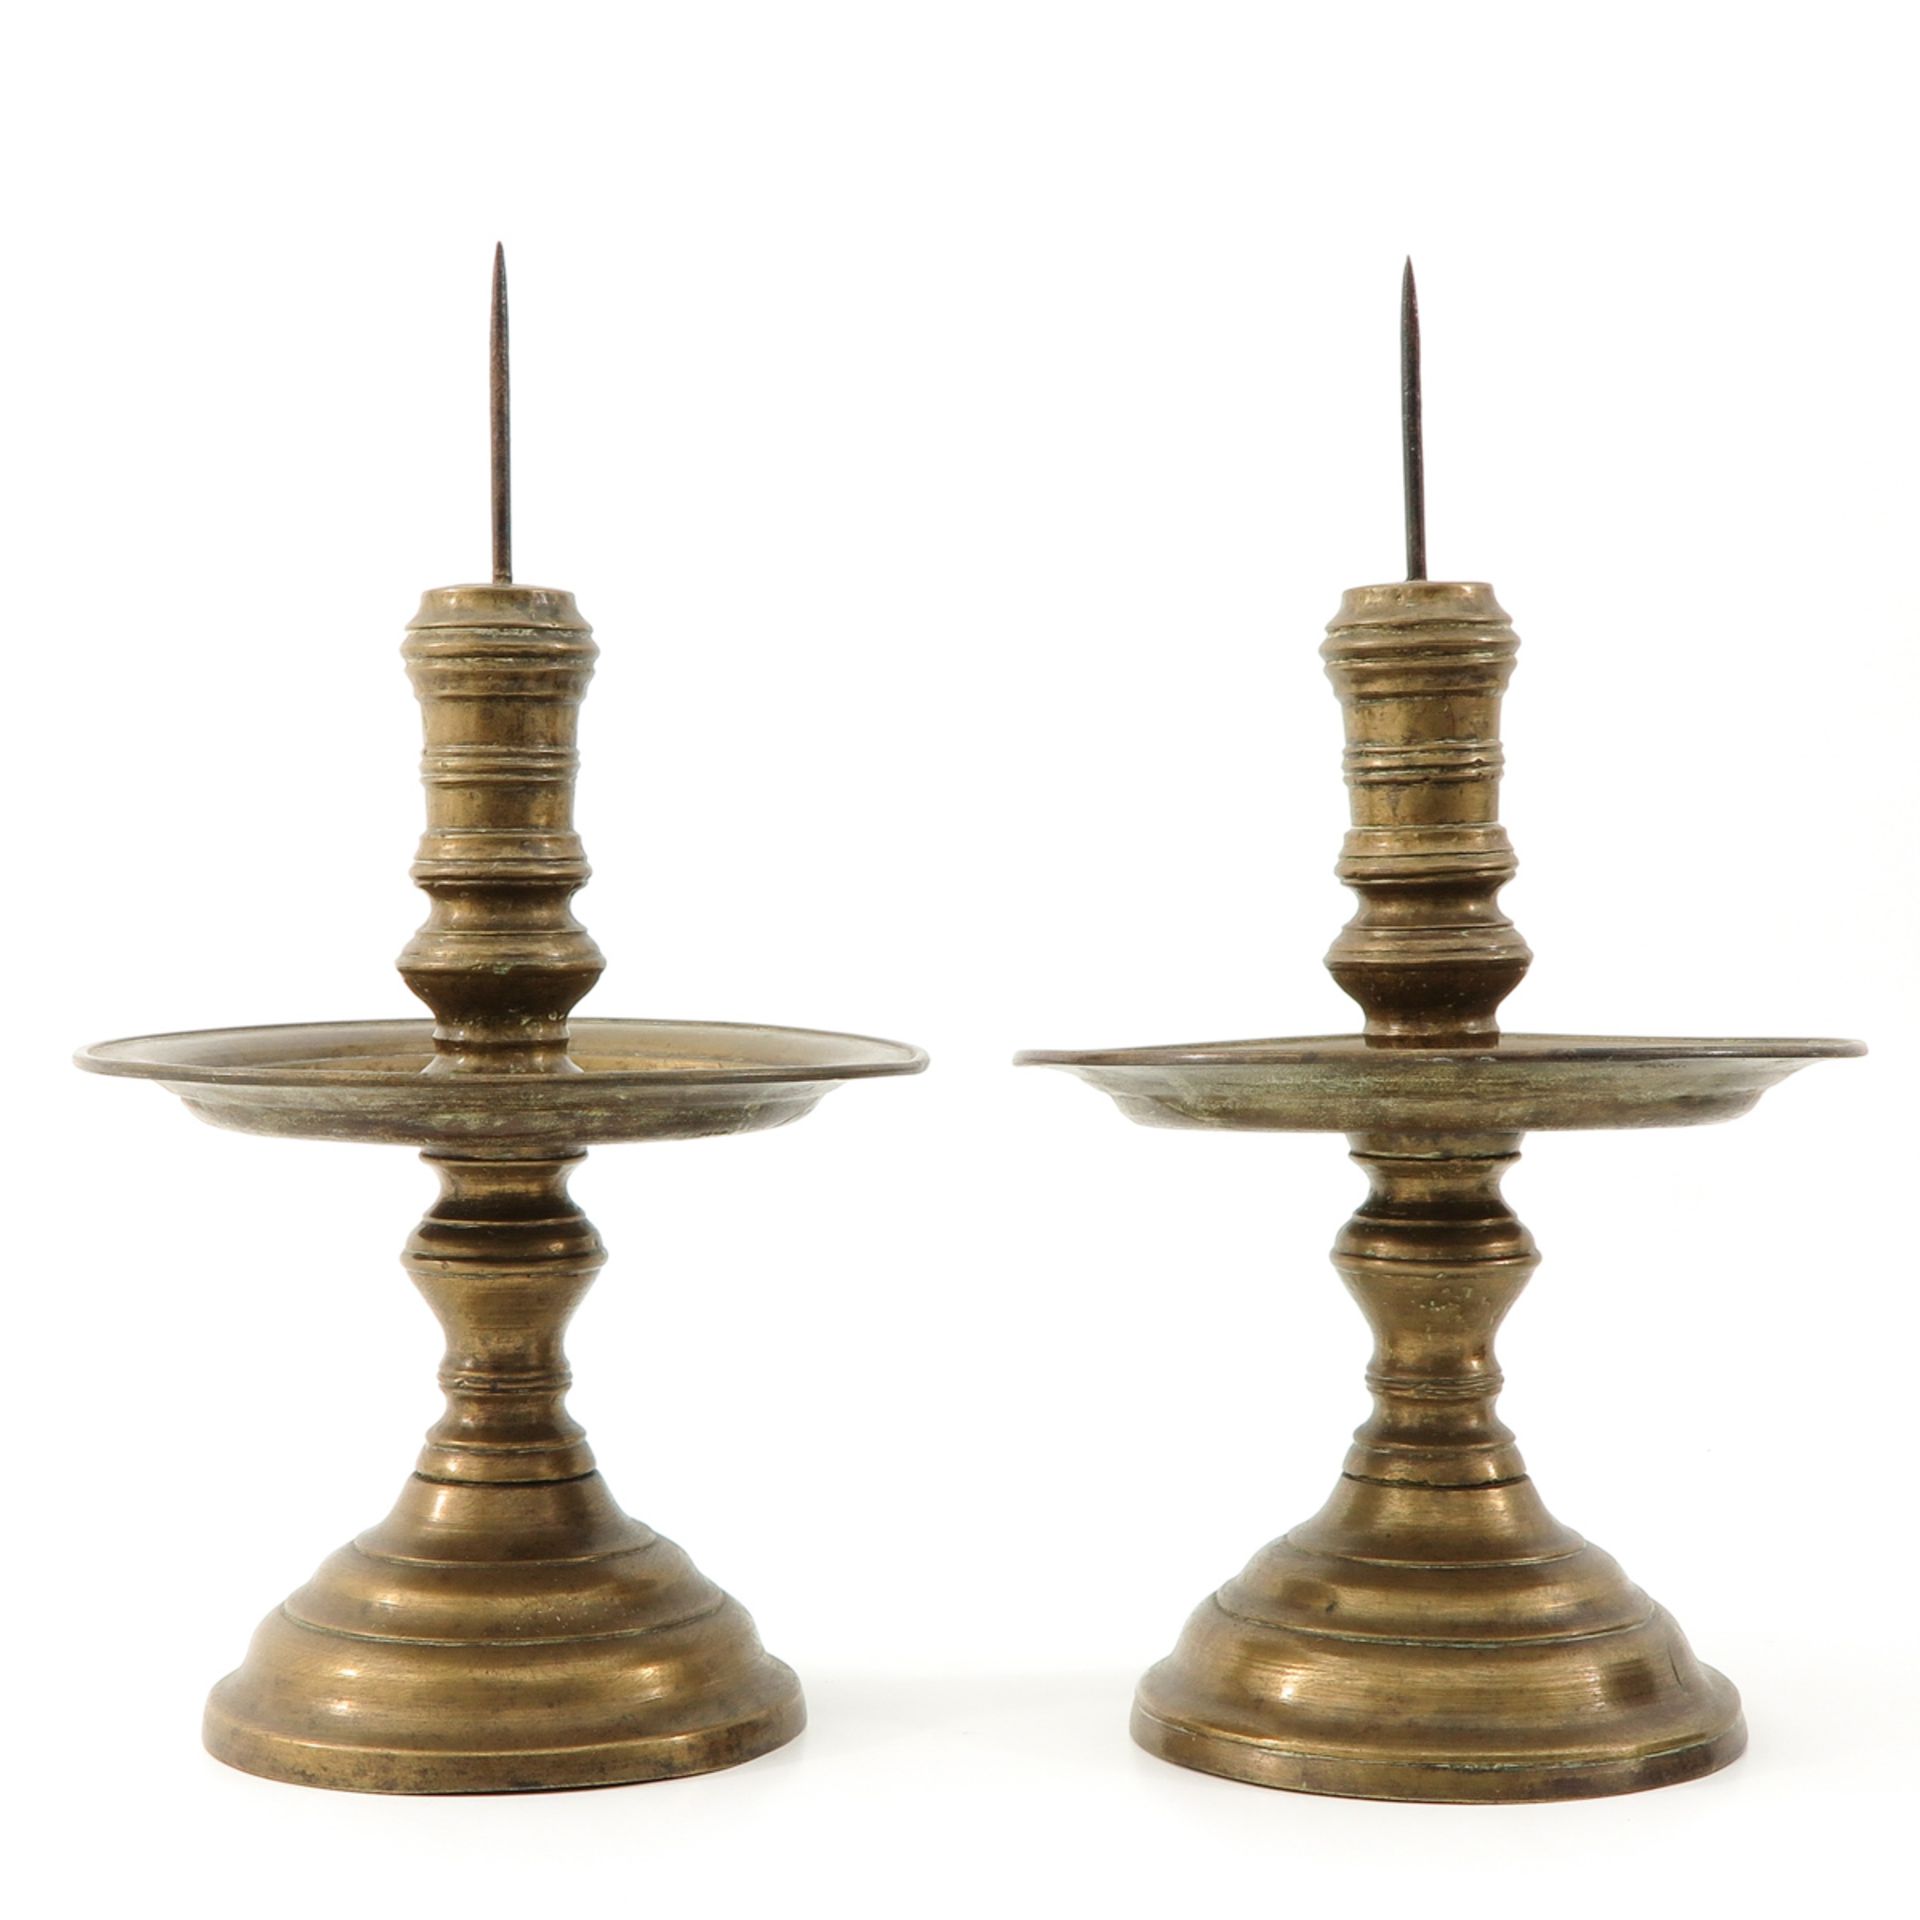 A Pair of Antique Brass Candlesticks - Image 2 of 7